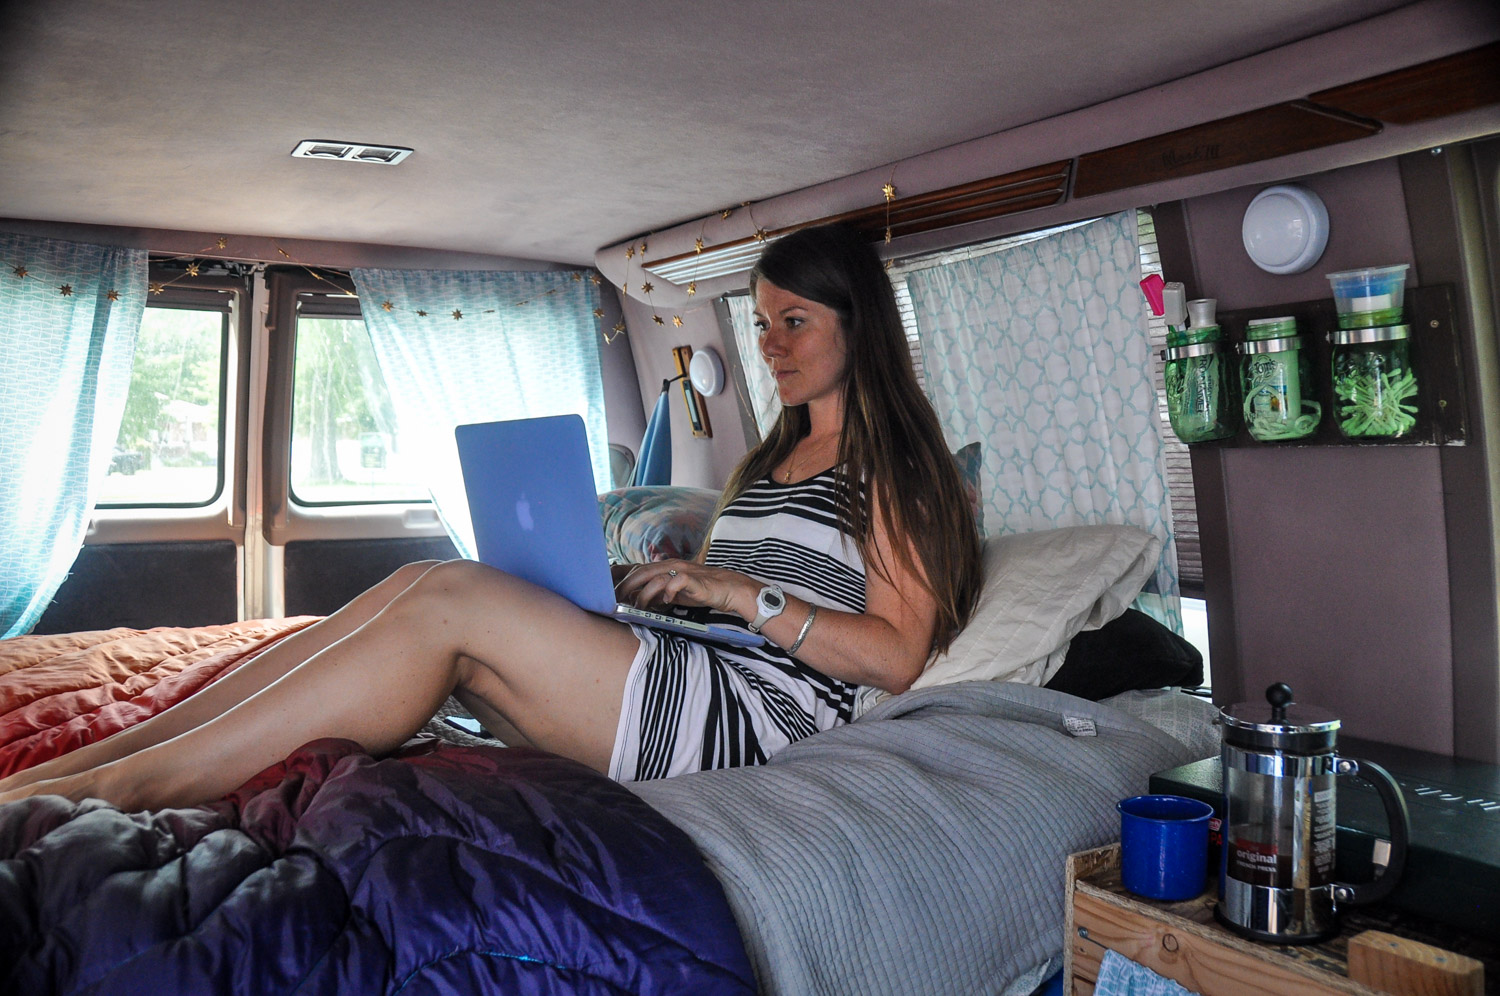 …or you can work from inside a van. The choice is yours!